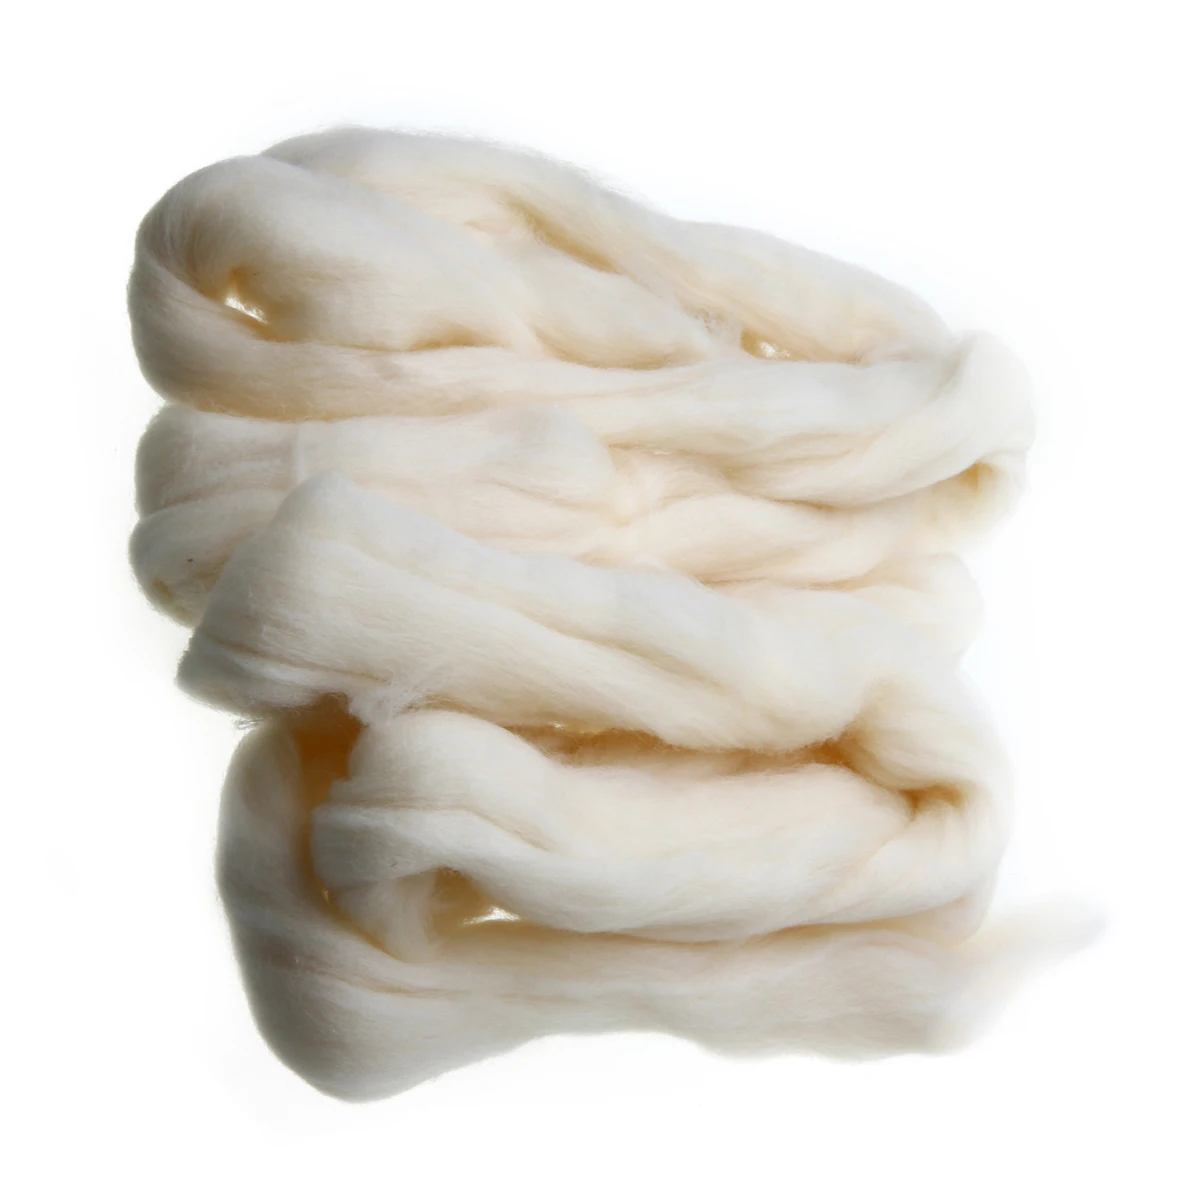 100g Cream White Needle Felting Wool Fluffy Soft Felting Wool Tops Roving Spinning Weaving Wool Fiber For DIY Sewing Crafts